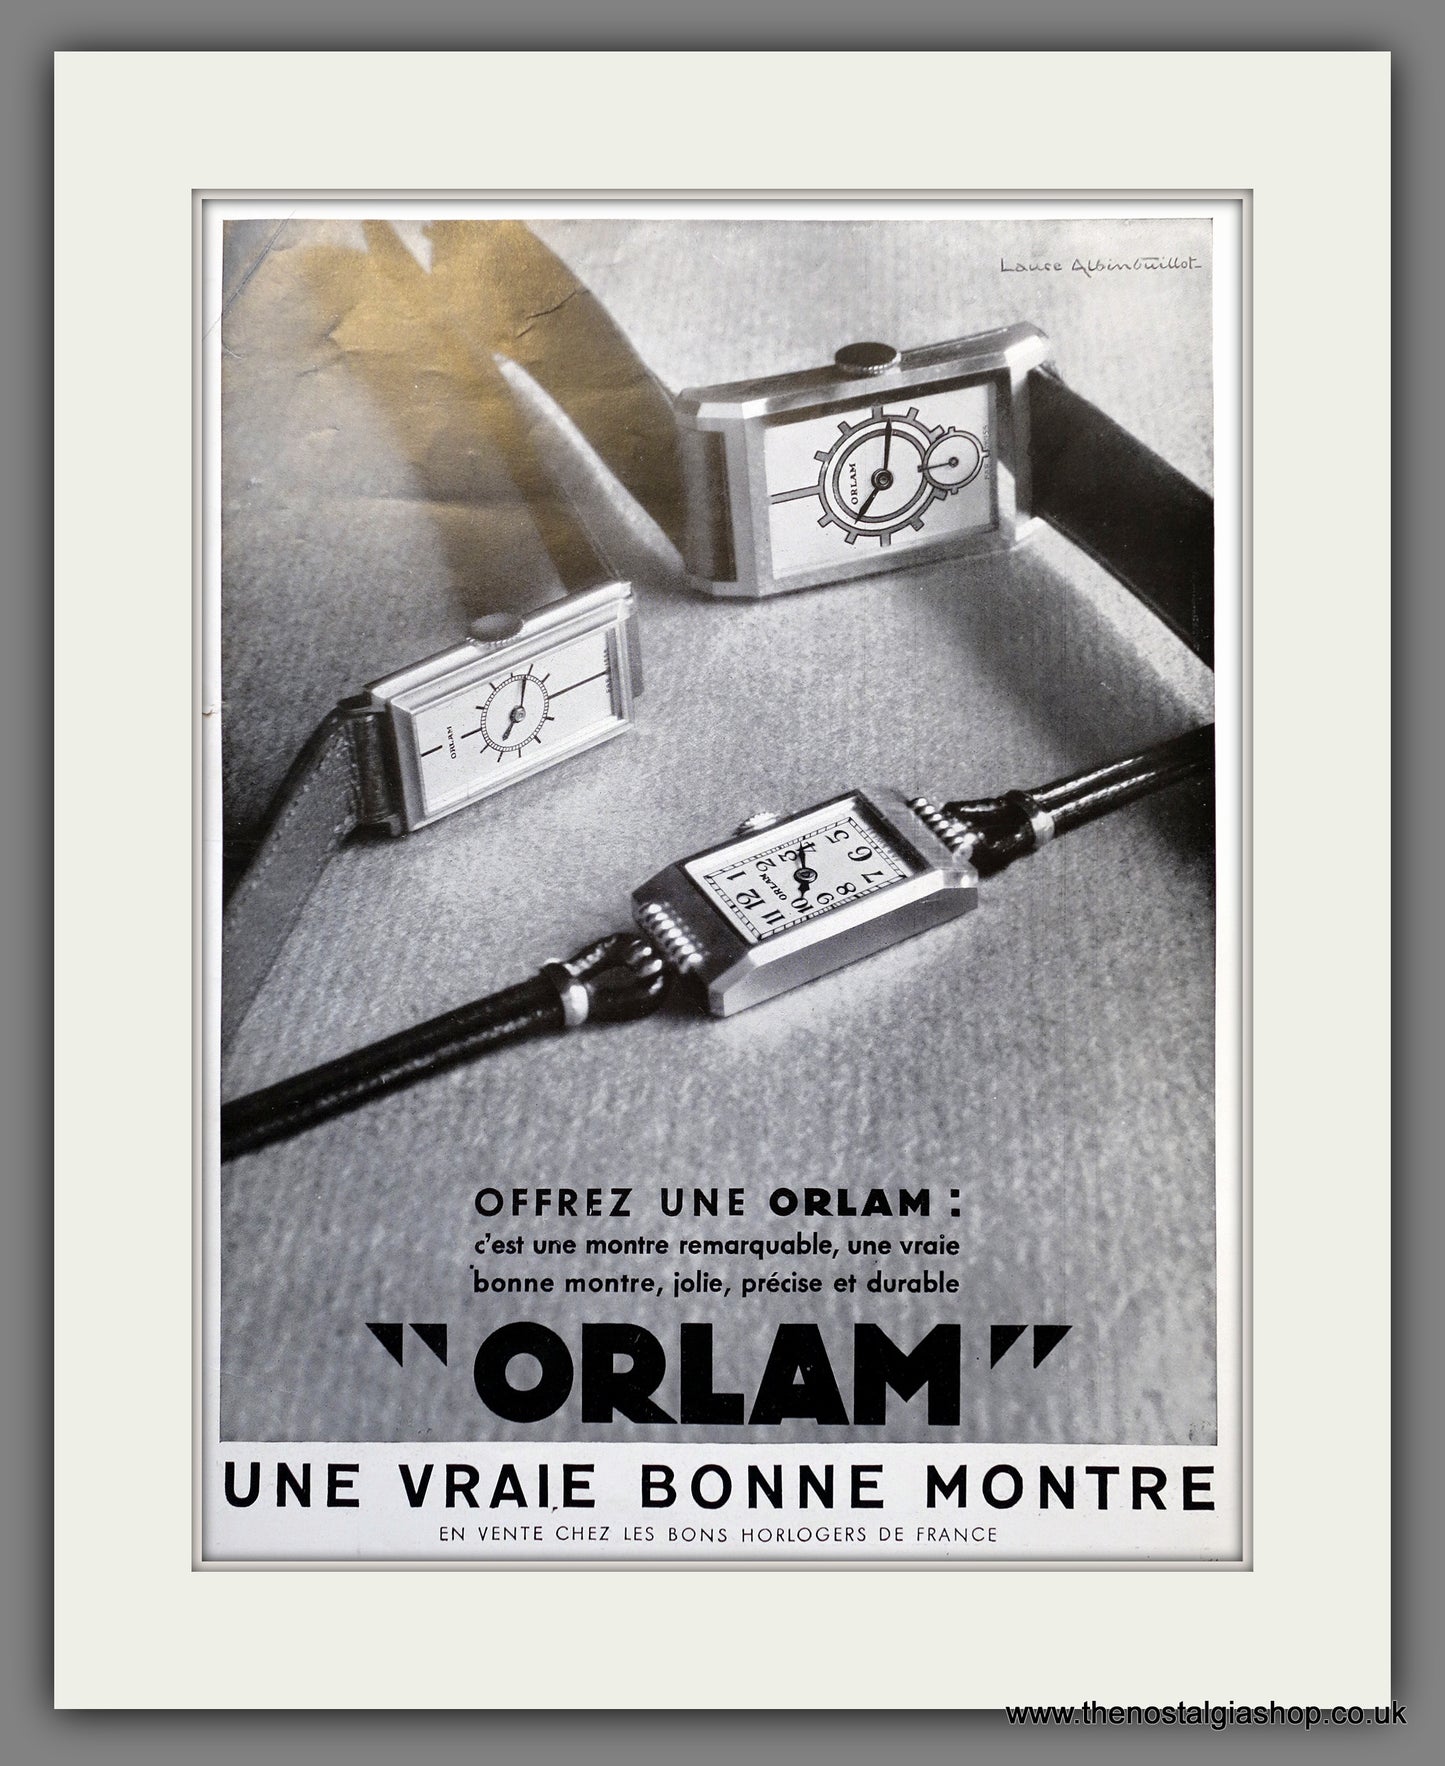 Orlam Watches. Original French Advert 1933 (ref AD301342)